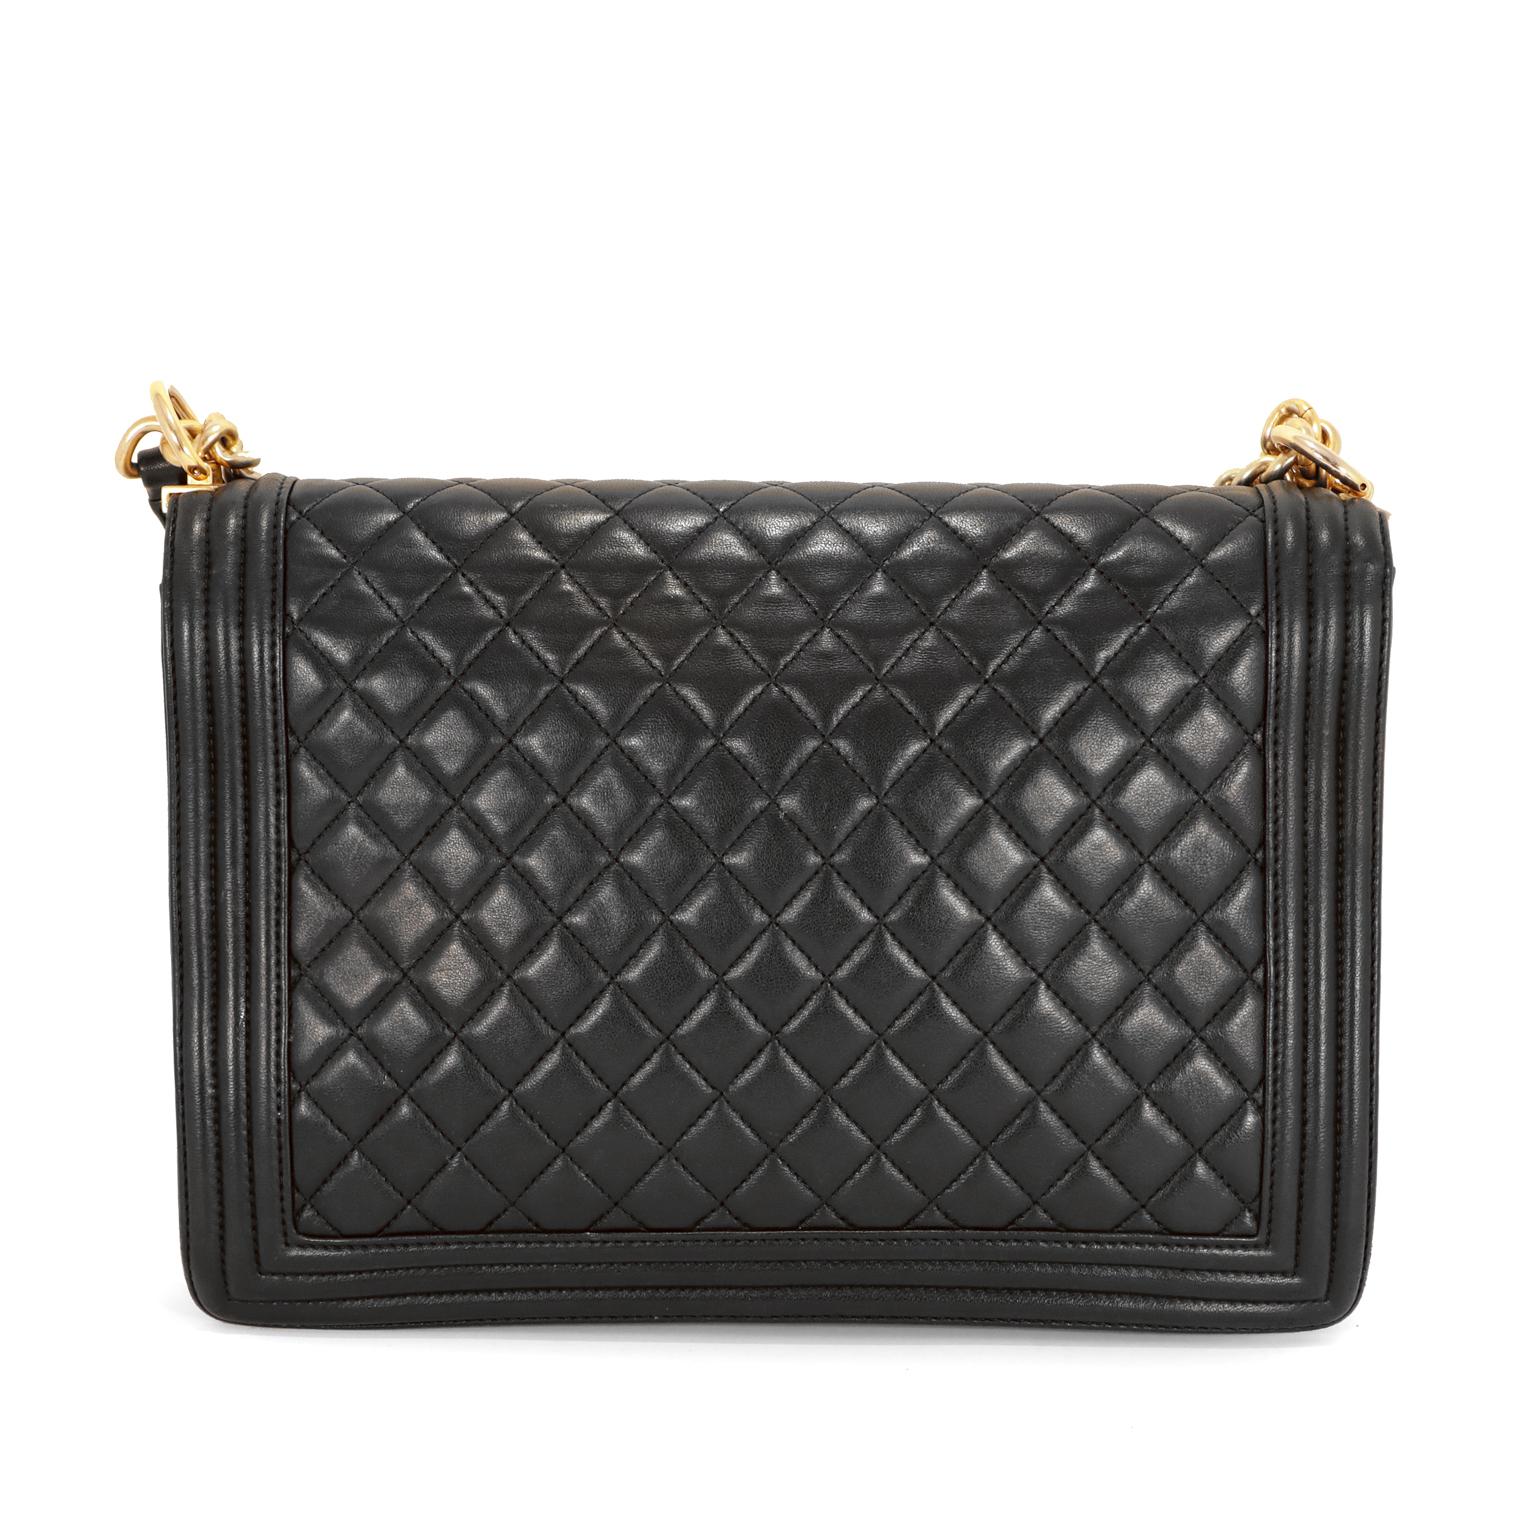 This authentic Chanel Black Leather Large Boy Bag is in excellent condition.     The updated design is structured and edgy with a versatility that makes it extremely popular.  
Black leather is quilted in signature Chanel diamond stitched pattern. 